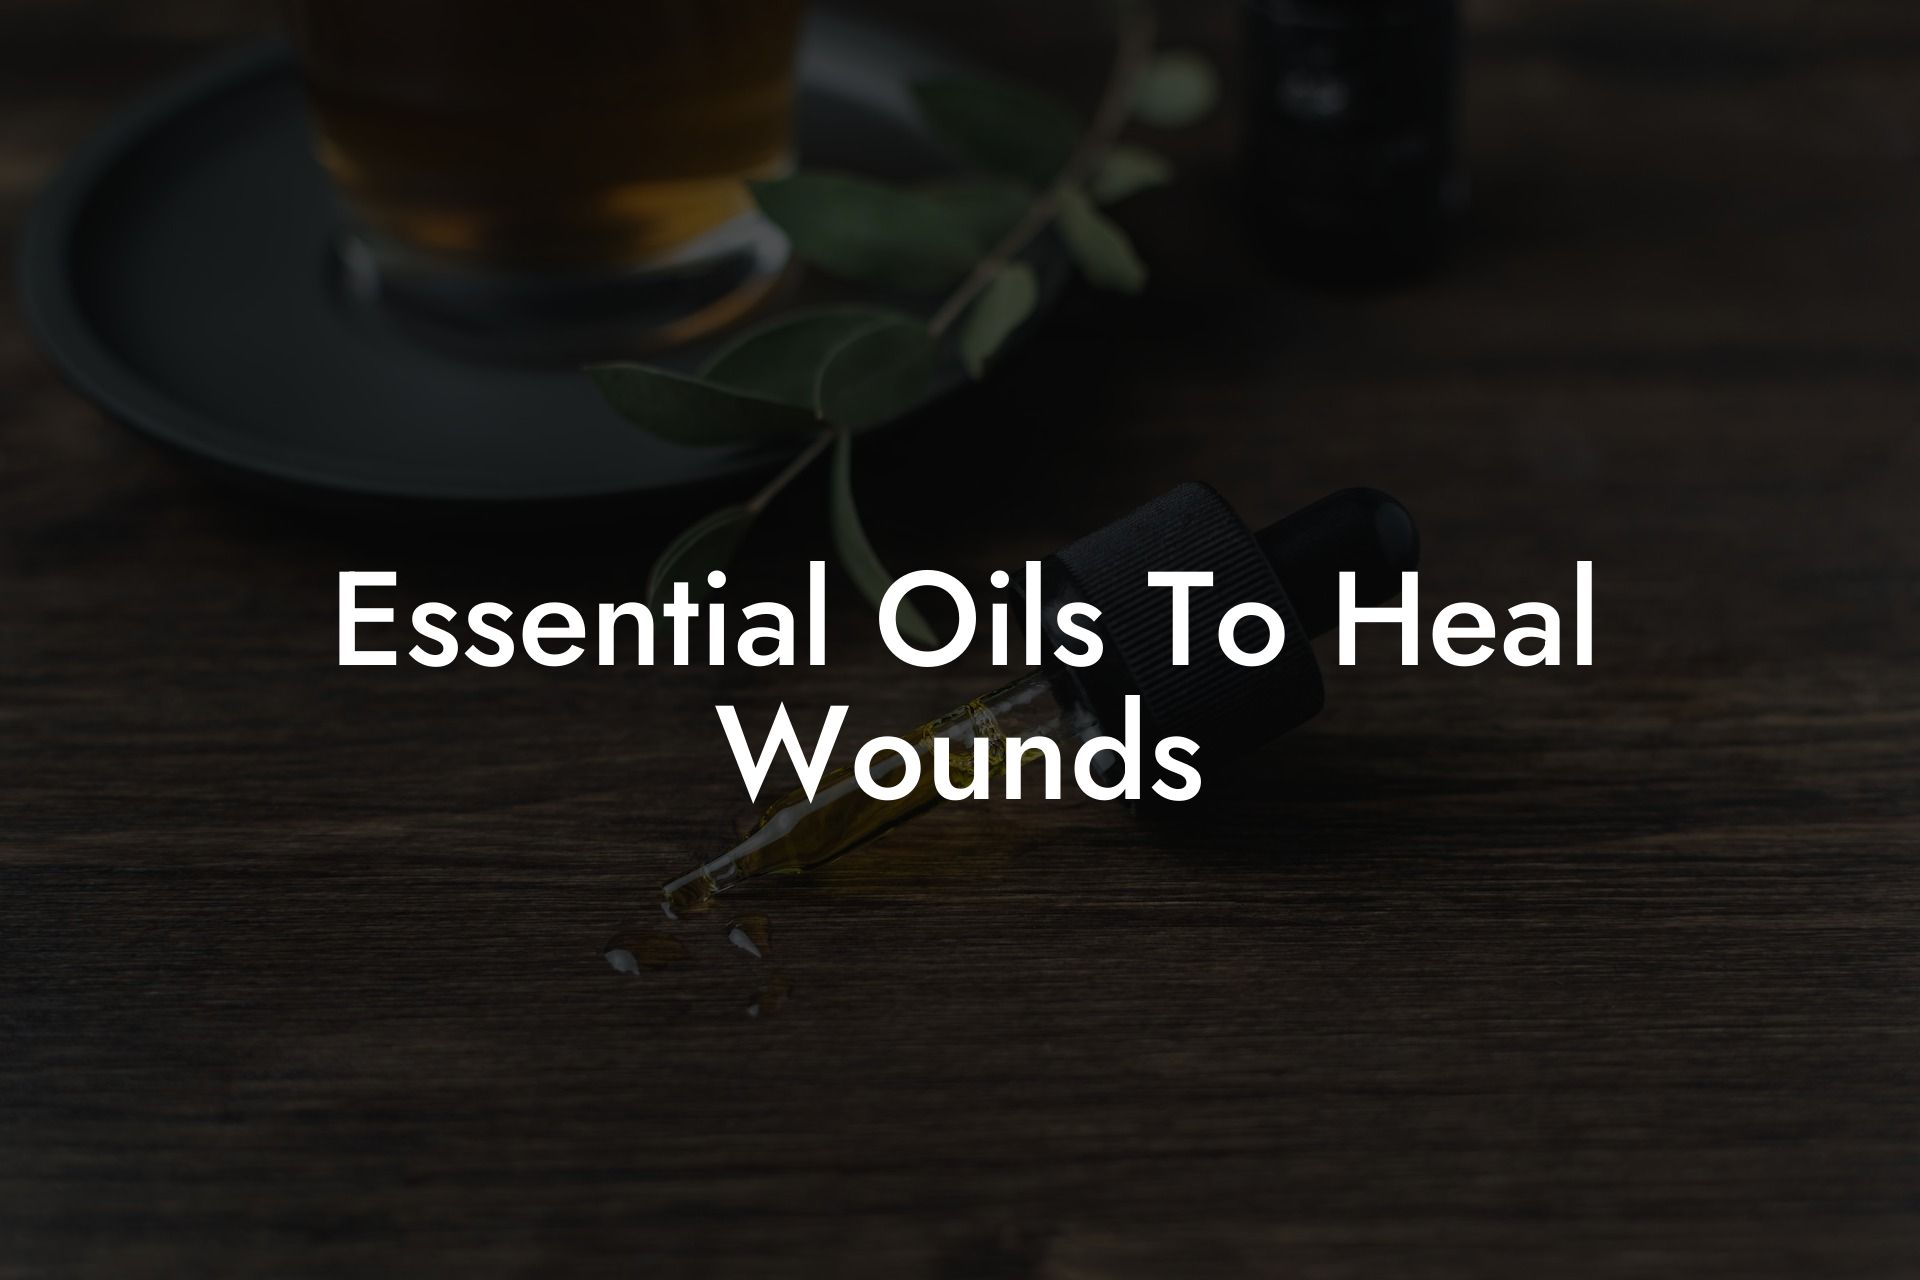 Essential Oils To Heal Wounds